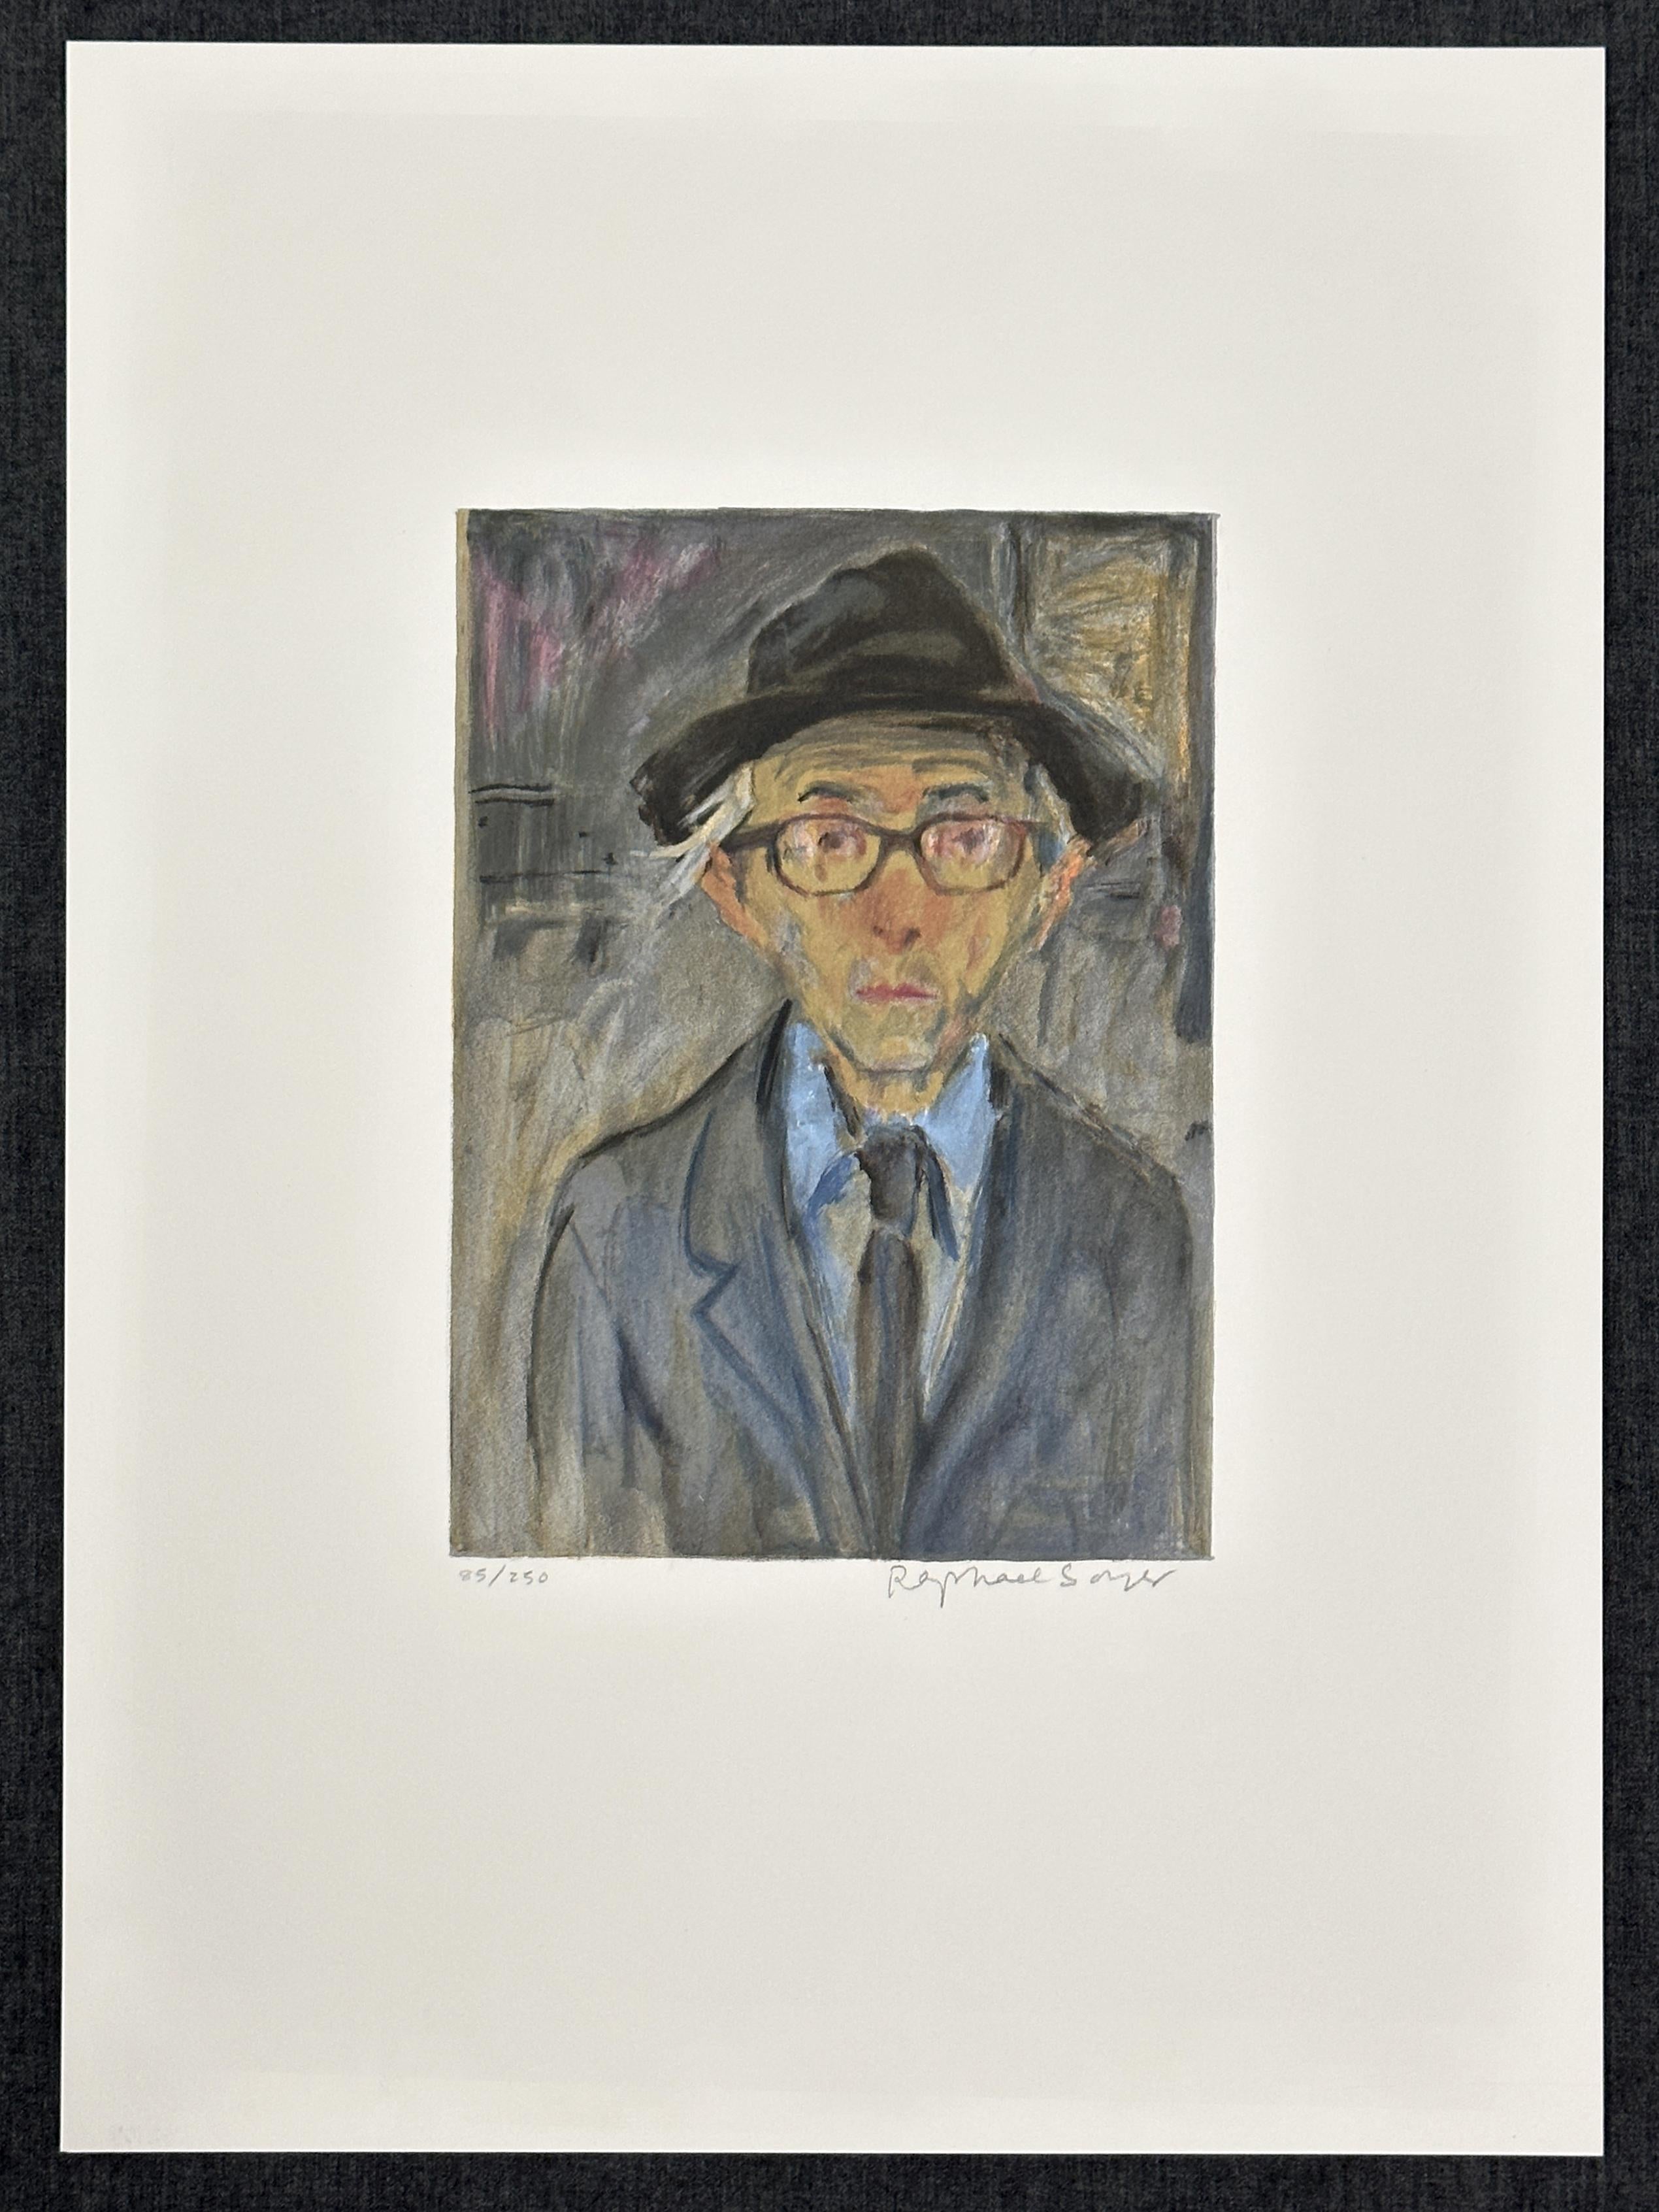 Self Portrait 1979 Signed Limited Edition Lithograph - Print by Raphael Soyer